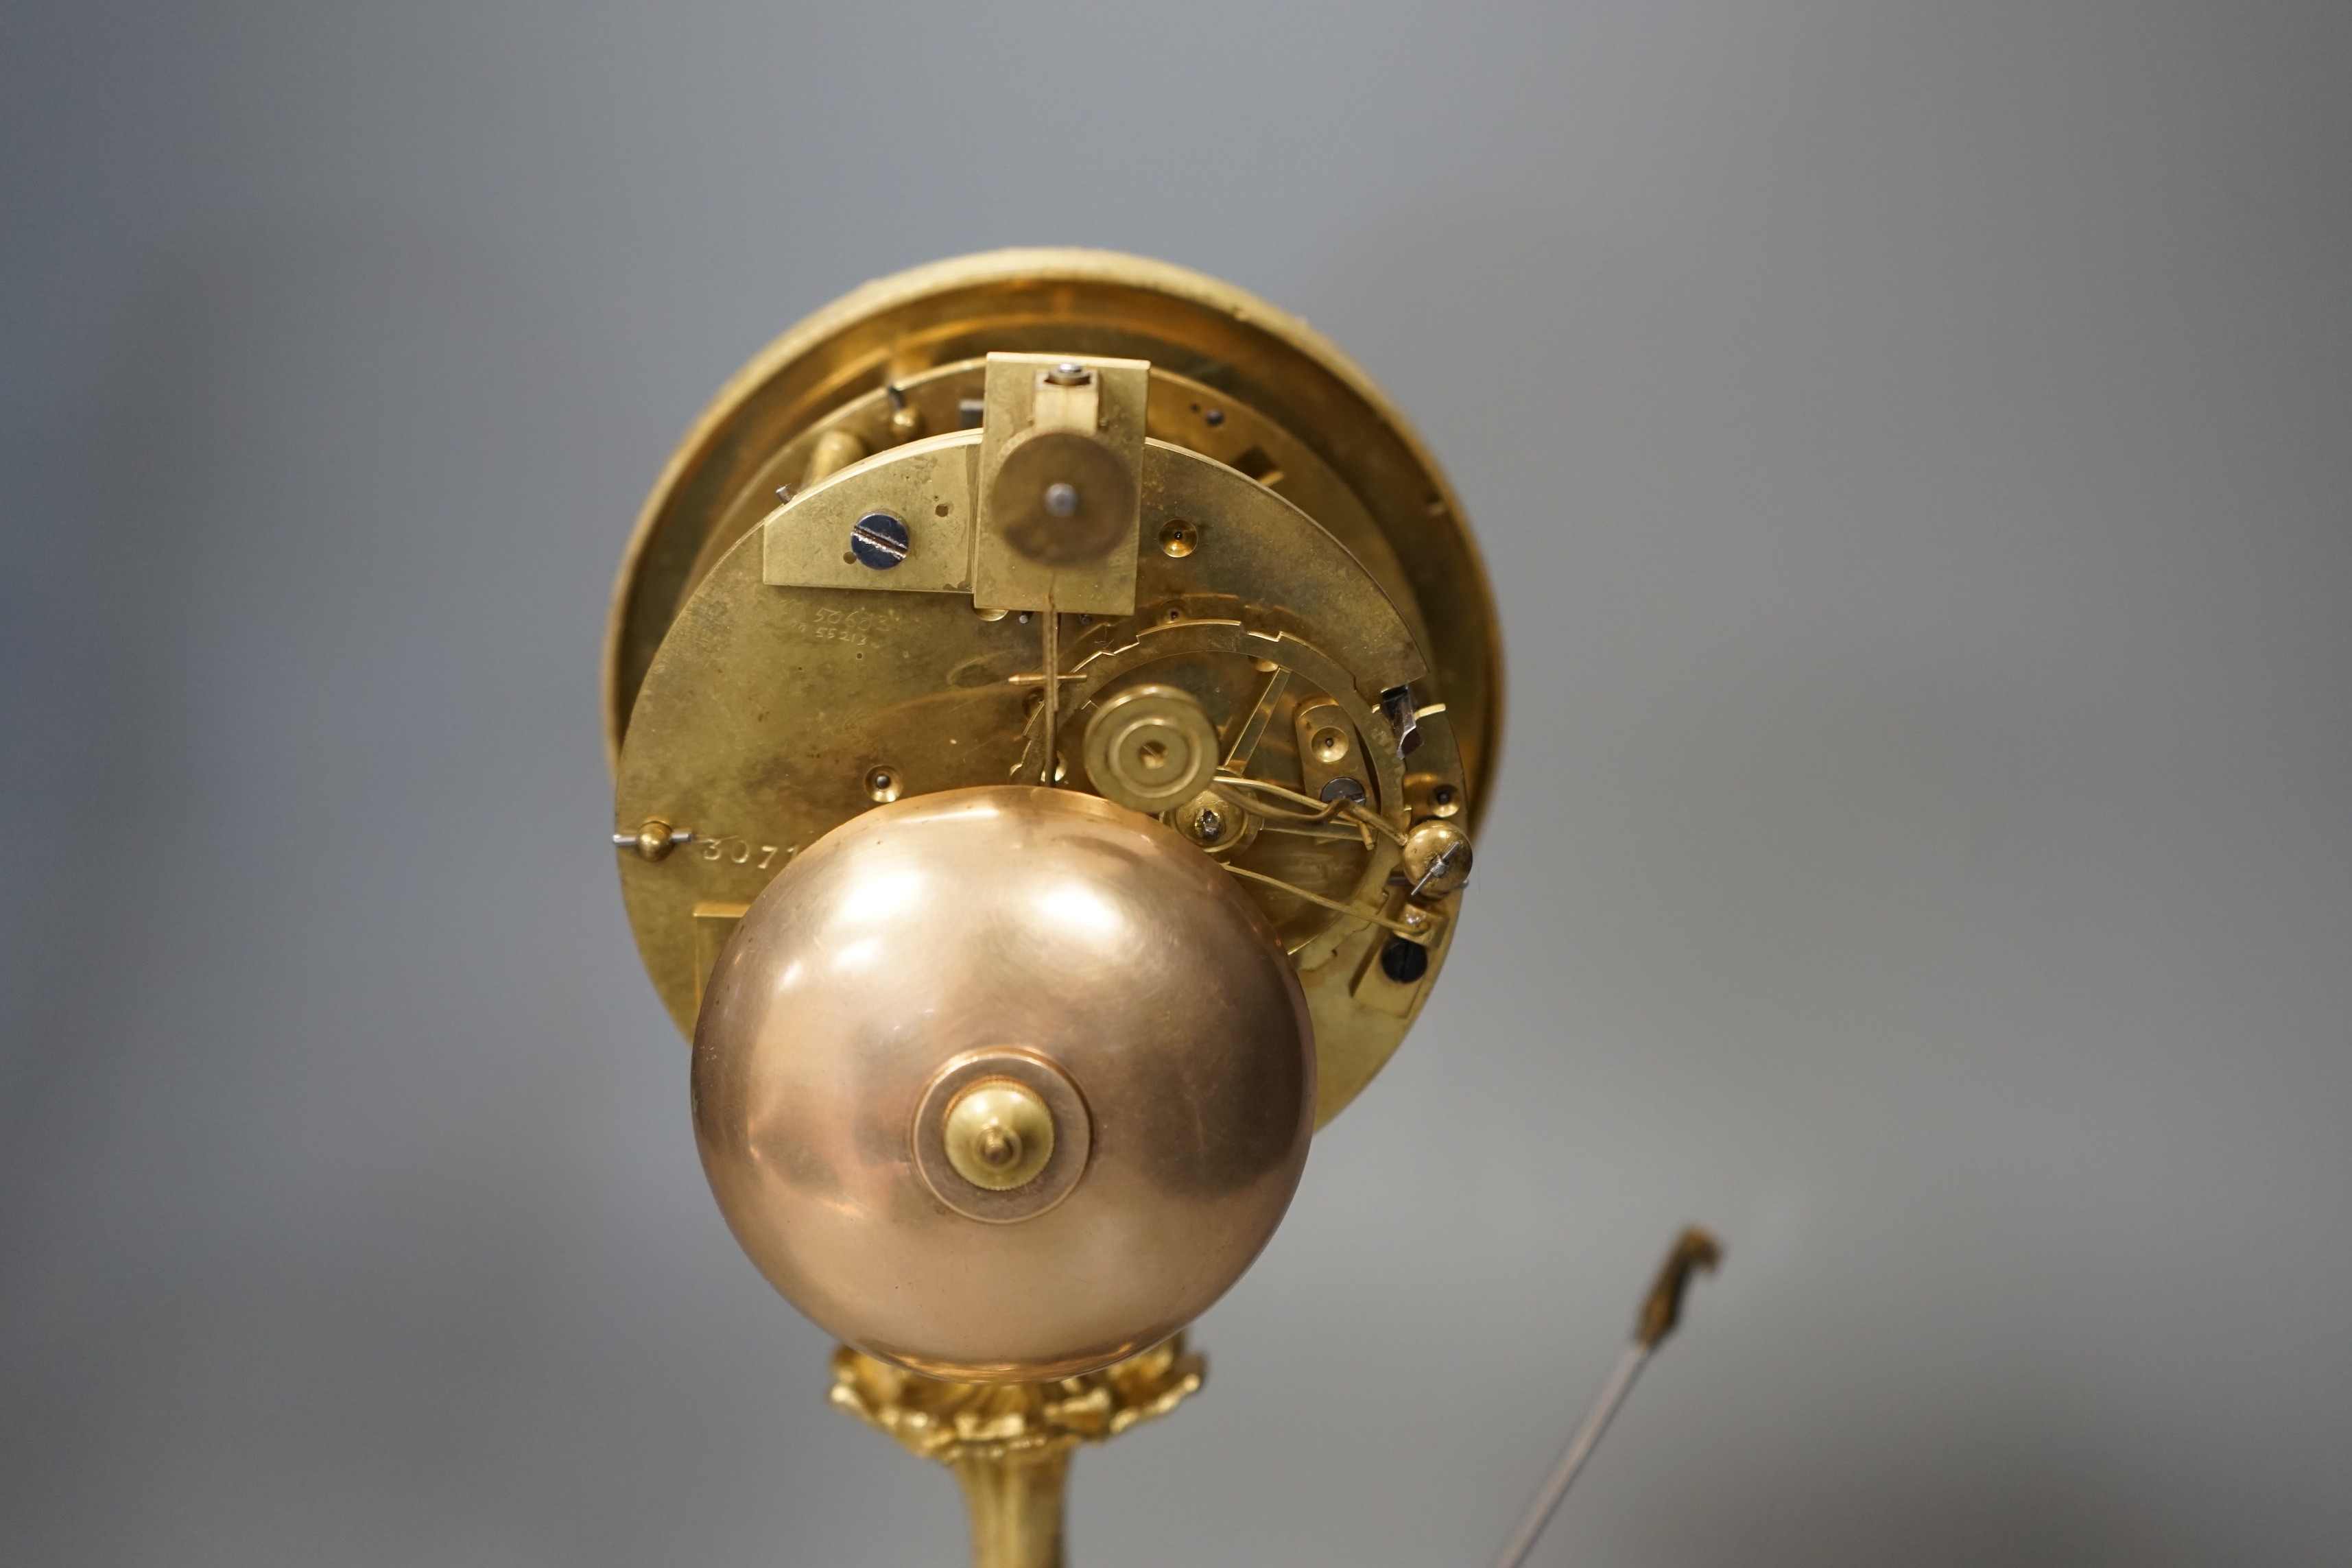 A French Grignon-Meusnier of Paris ormolu clock under dome, with key and pendulum